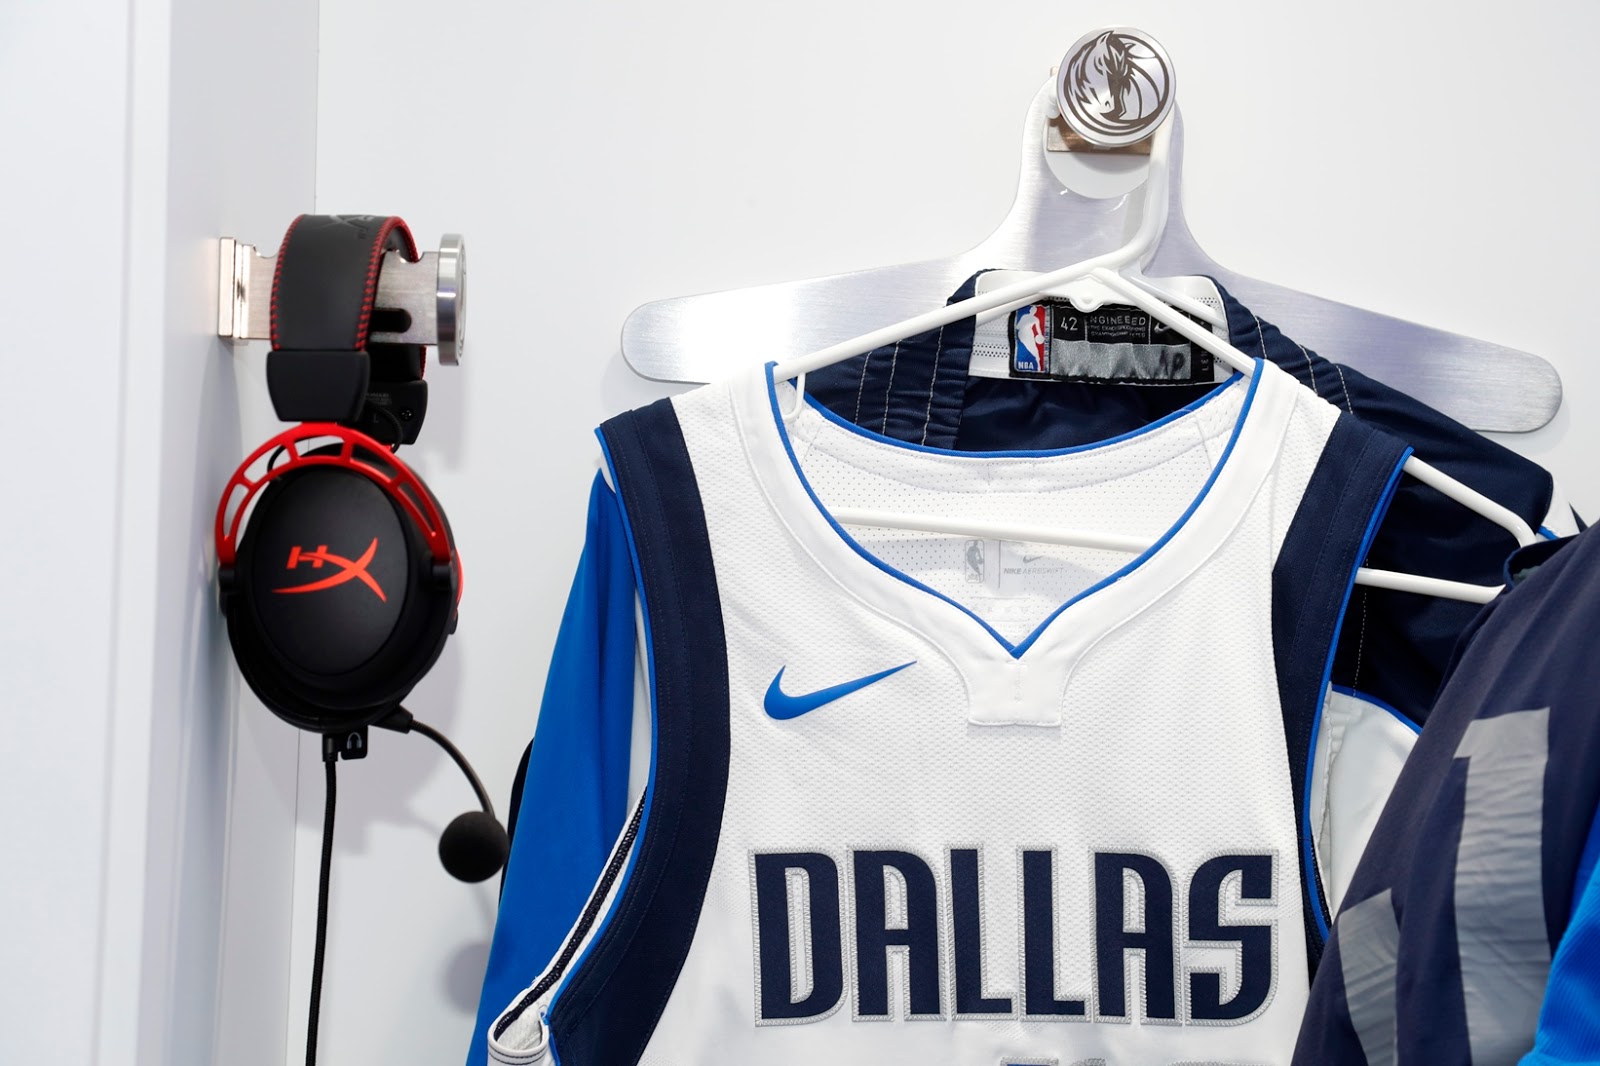 HyperX Now the Official Gaming Headset Partner of the Dallas Mavericks